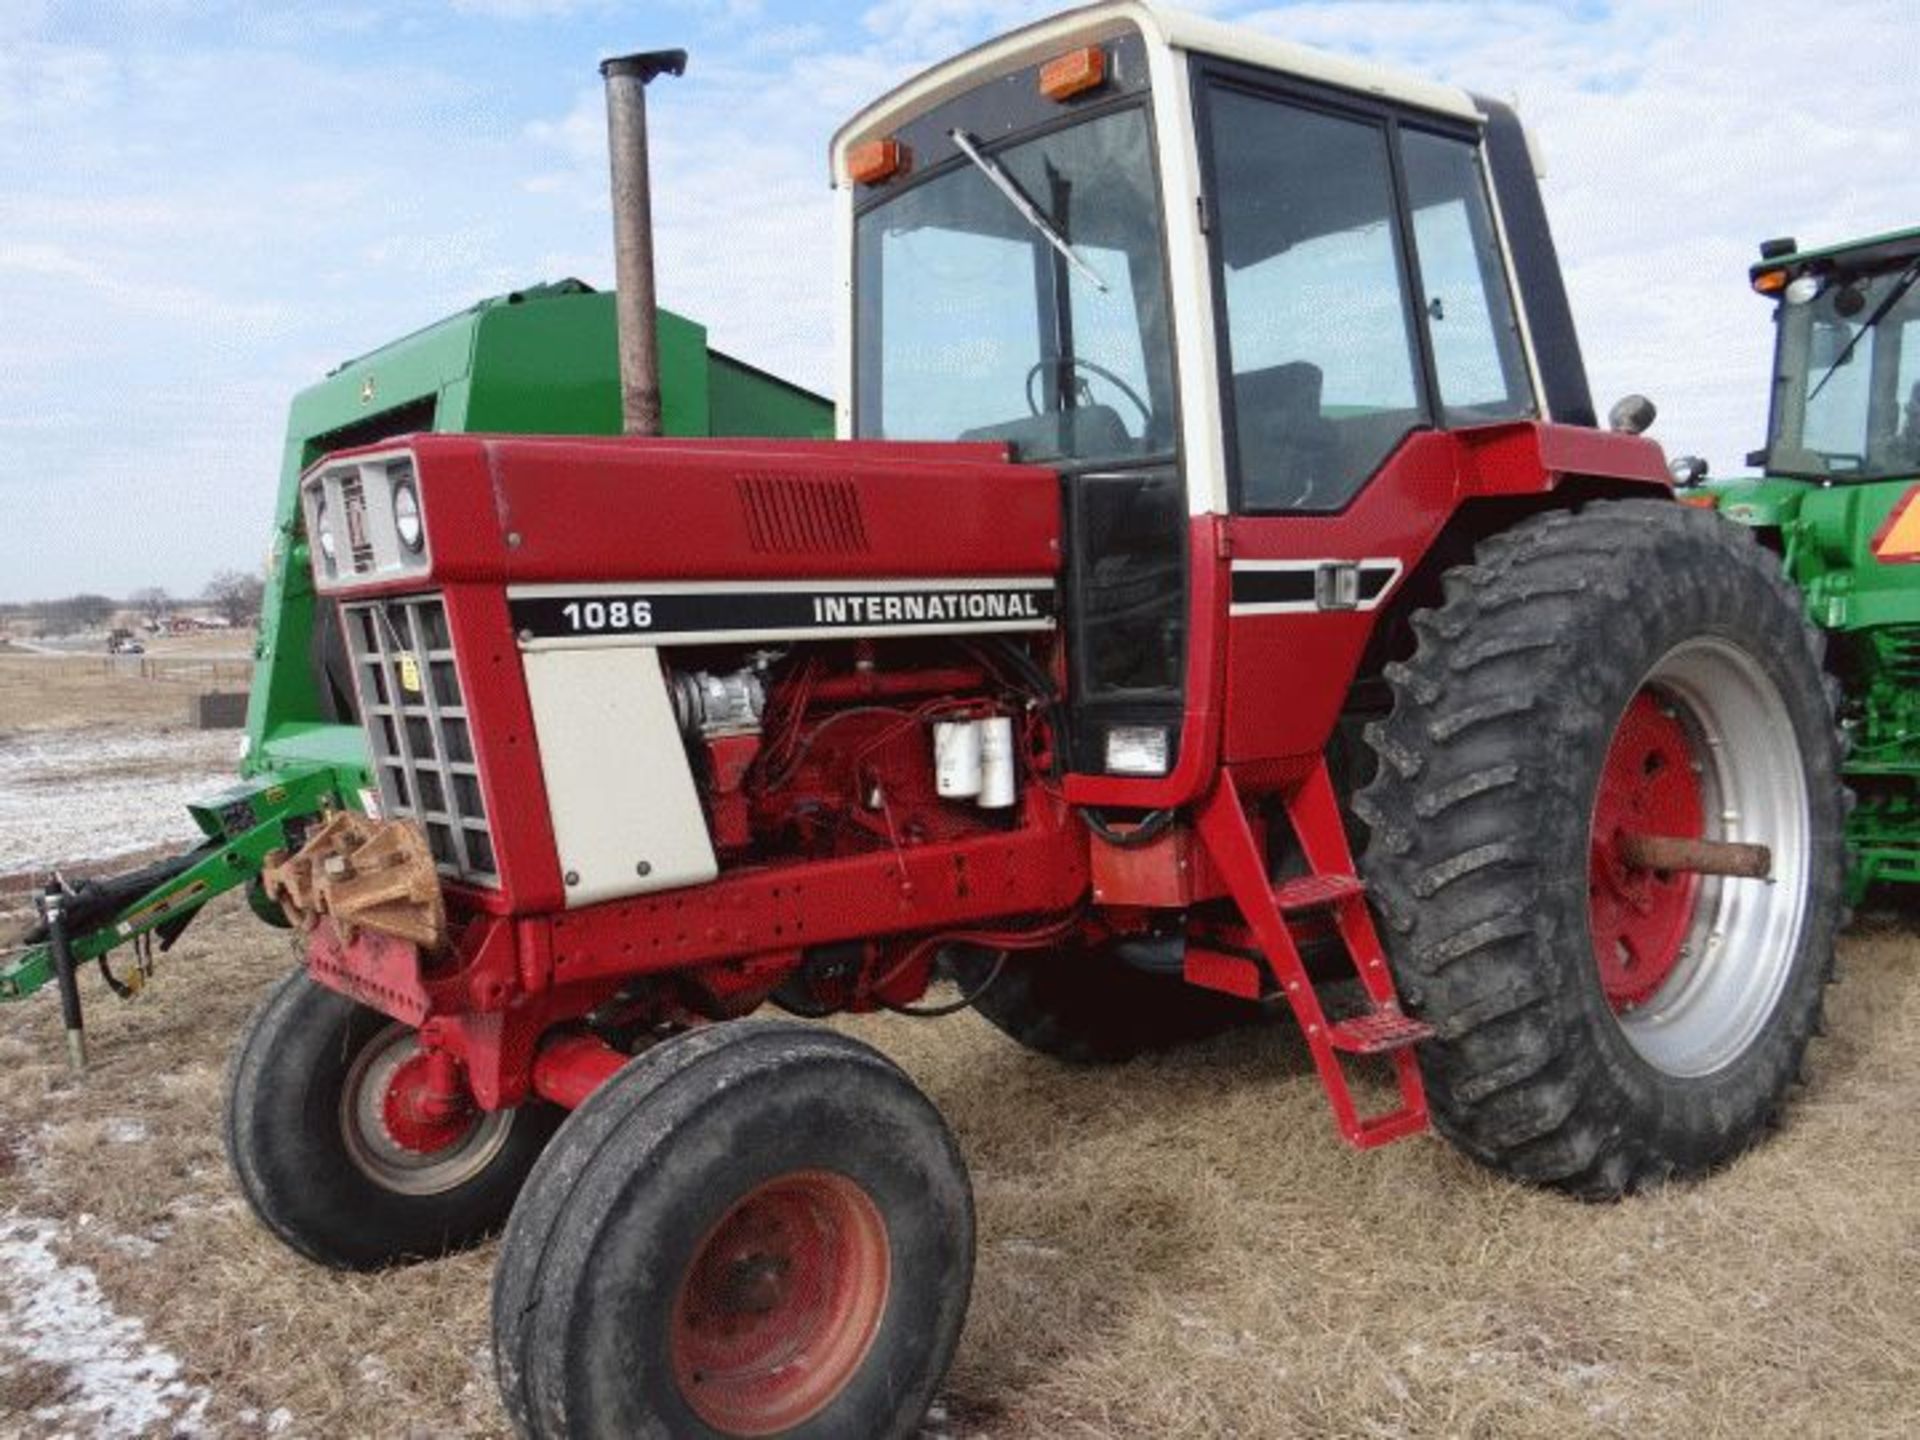 Lot # 283 IH 1086 Tractor Spent $12,300 on repairs, New TA and Clutch, New AC, All Repair Reciets in